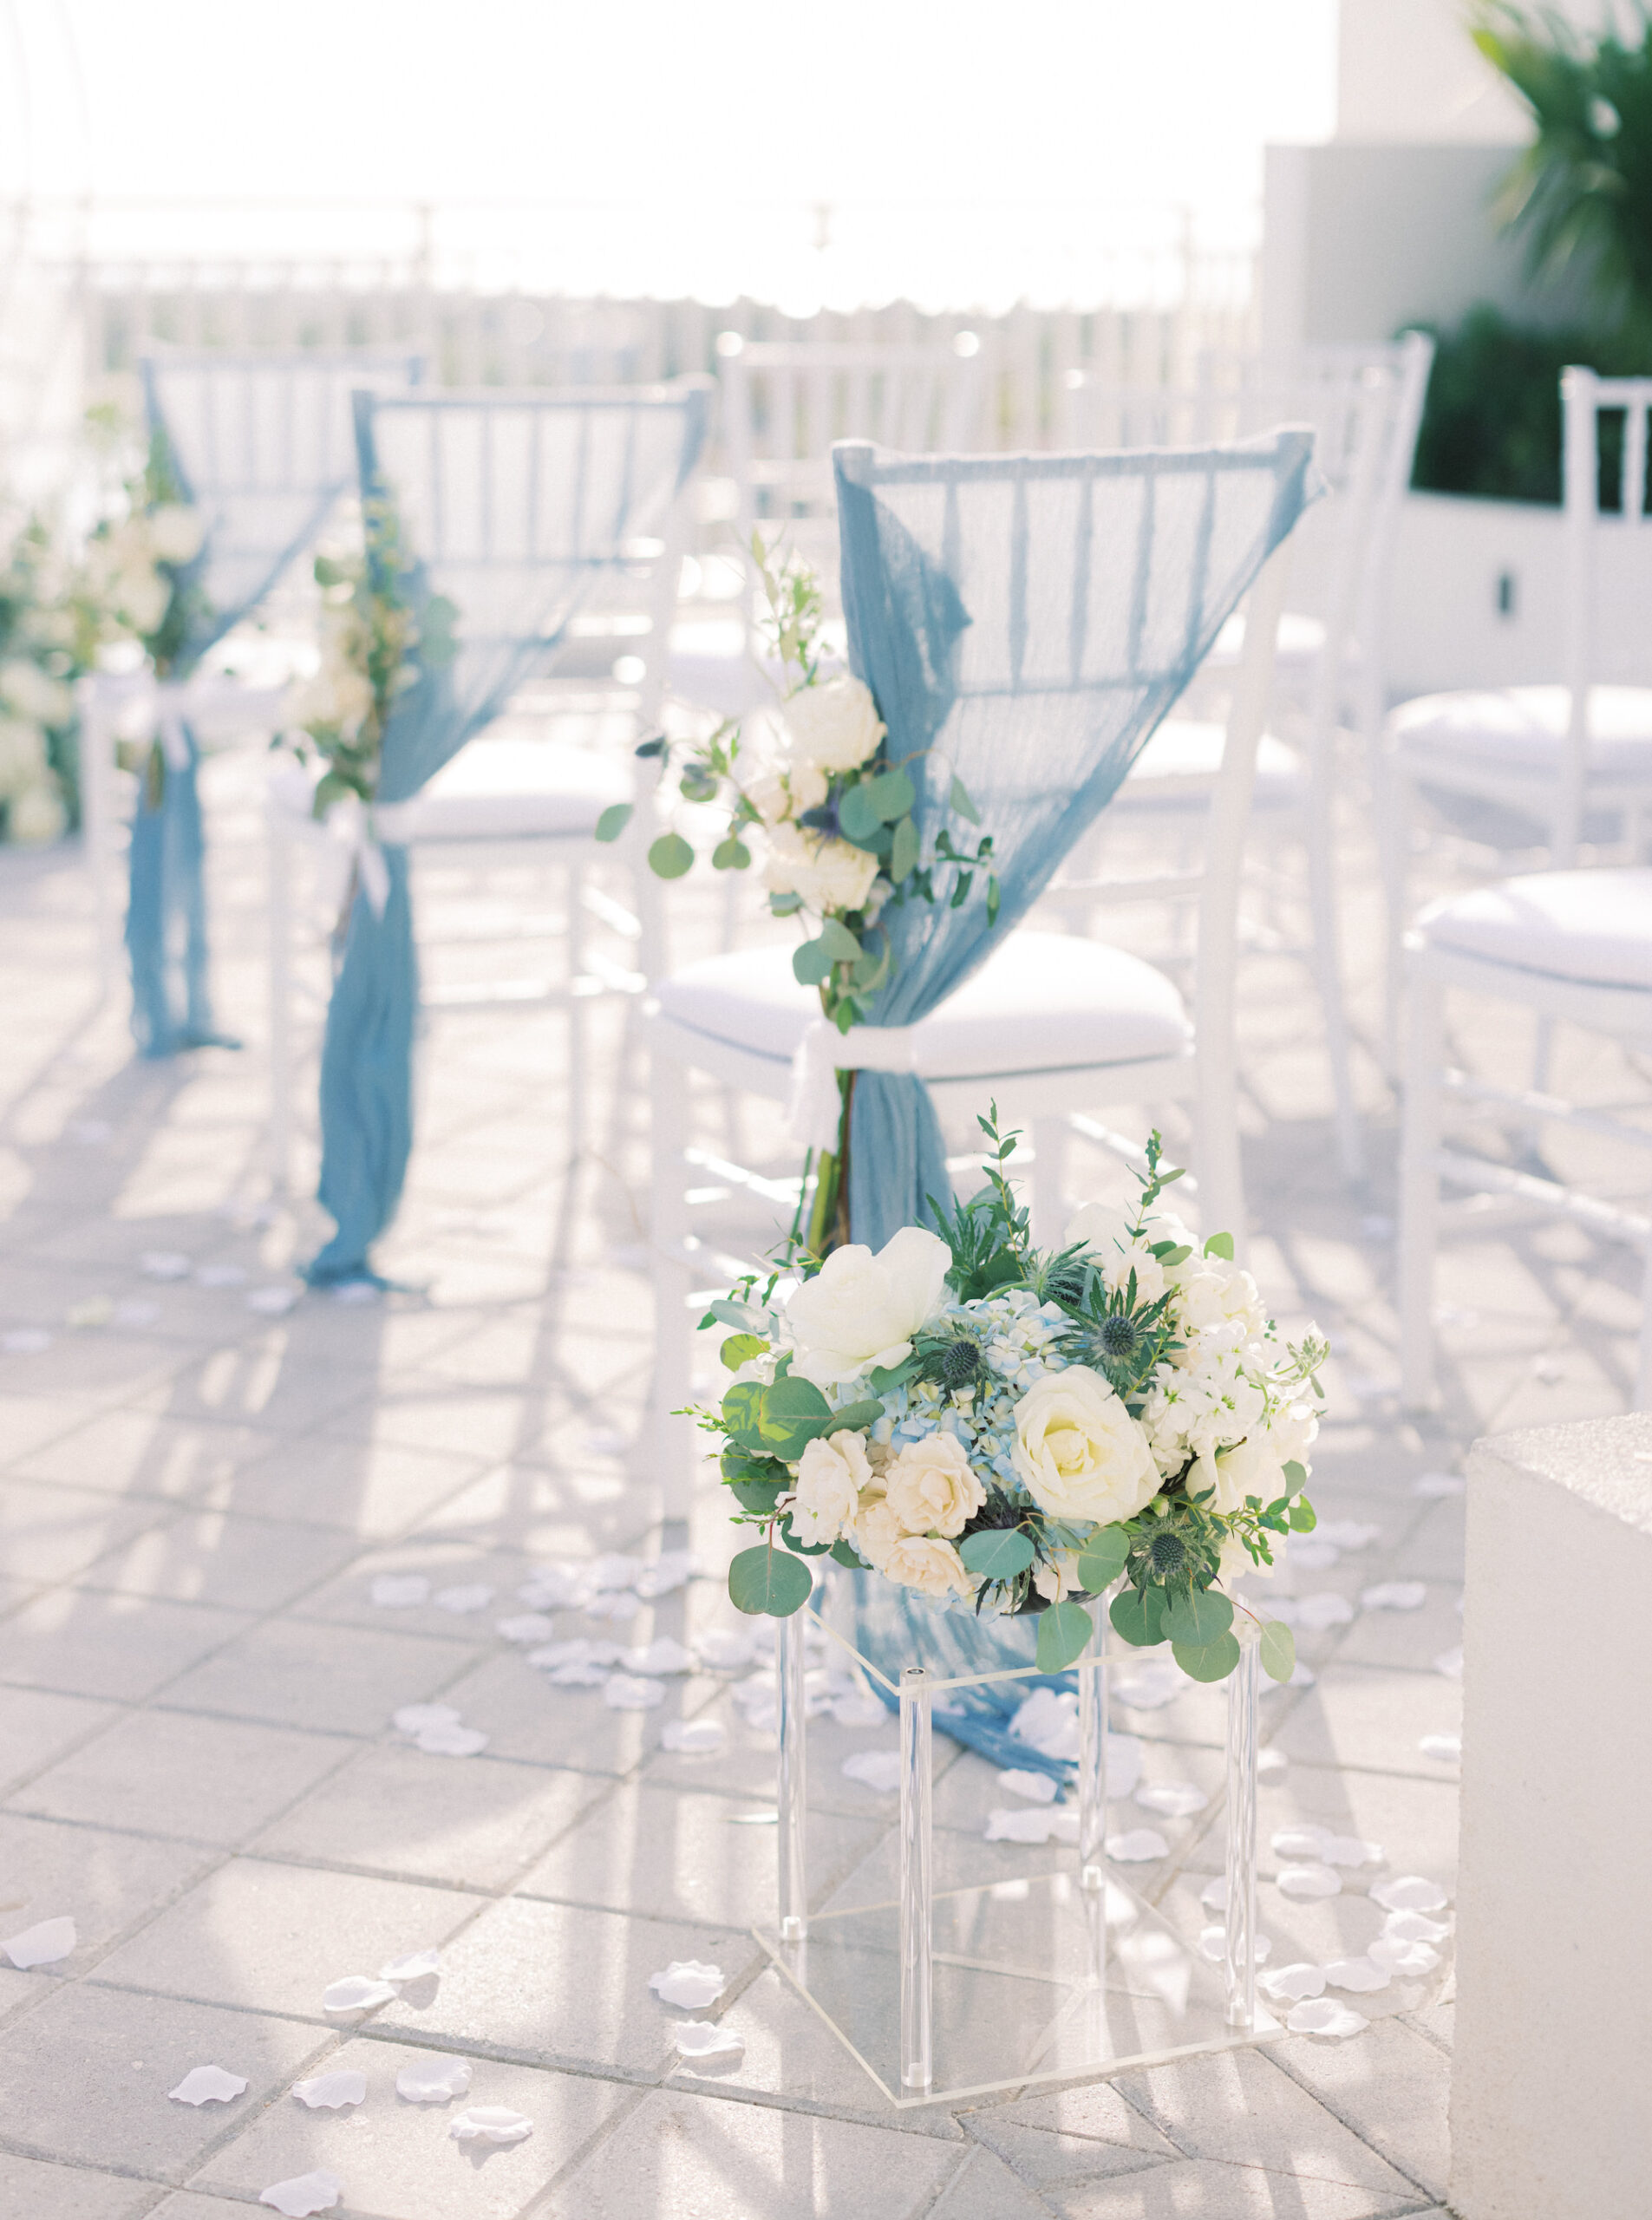 White Ceremony Chairs with Blue Draping and White Floral and Greenery Detailing | Tampa Wedding Rentals Gabro Event Services